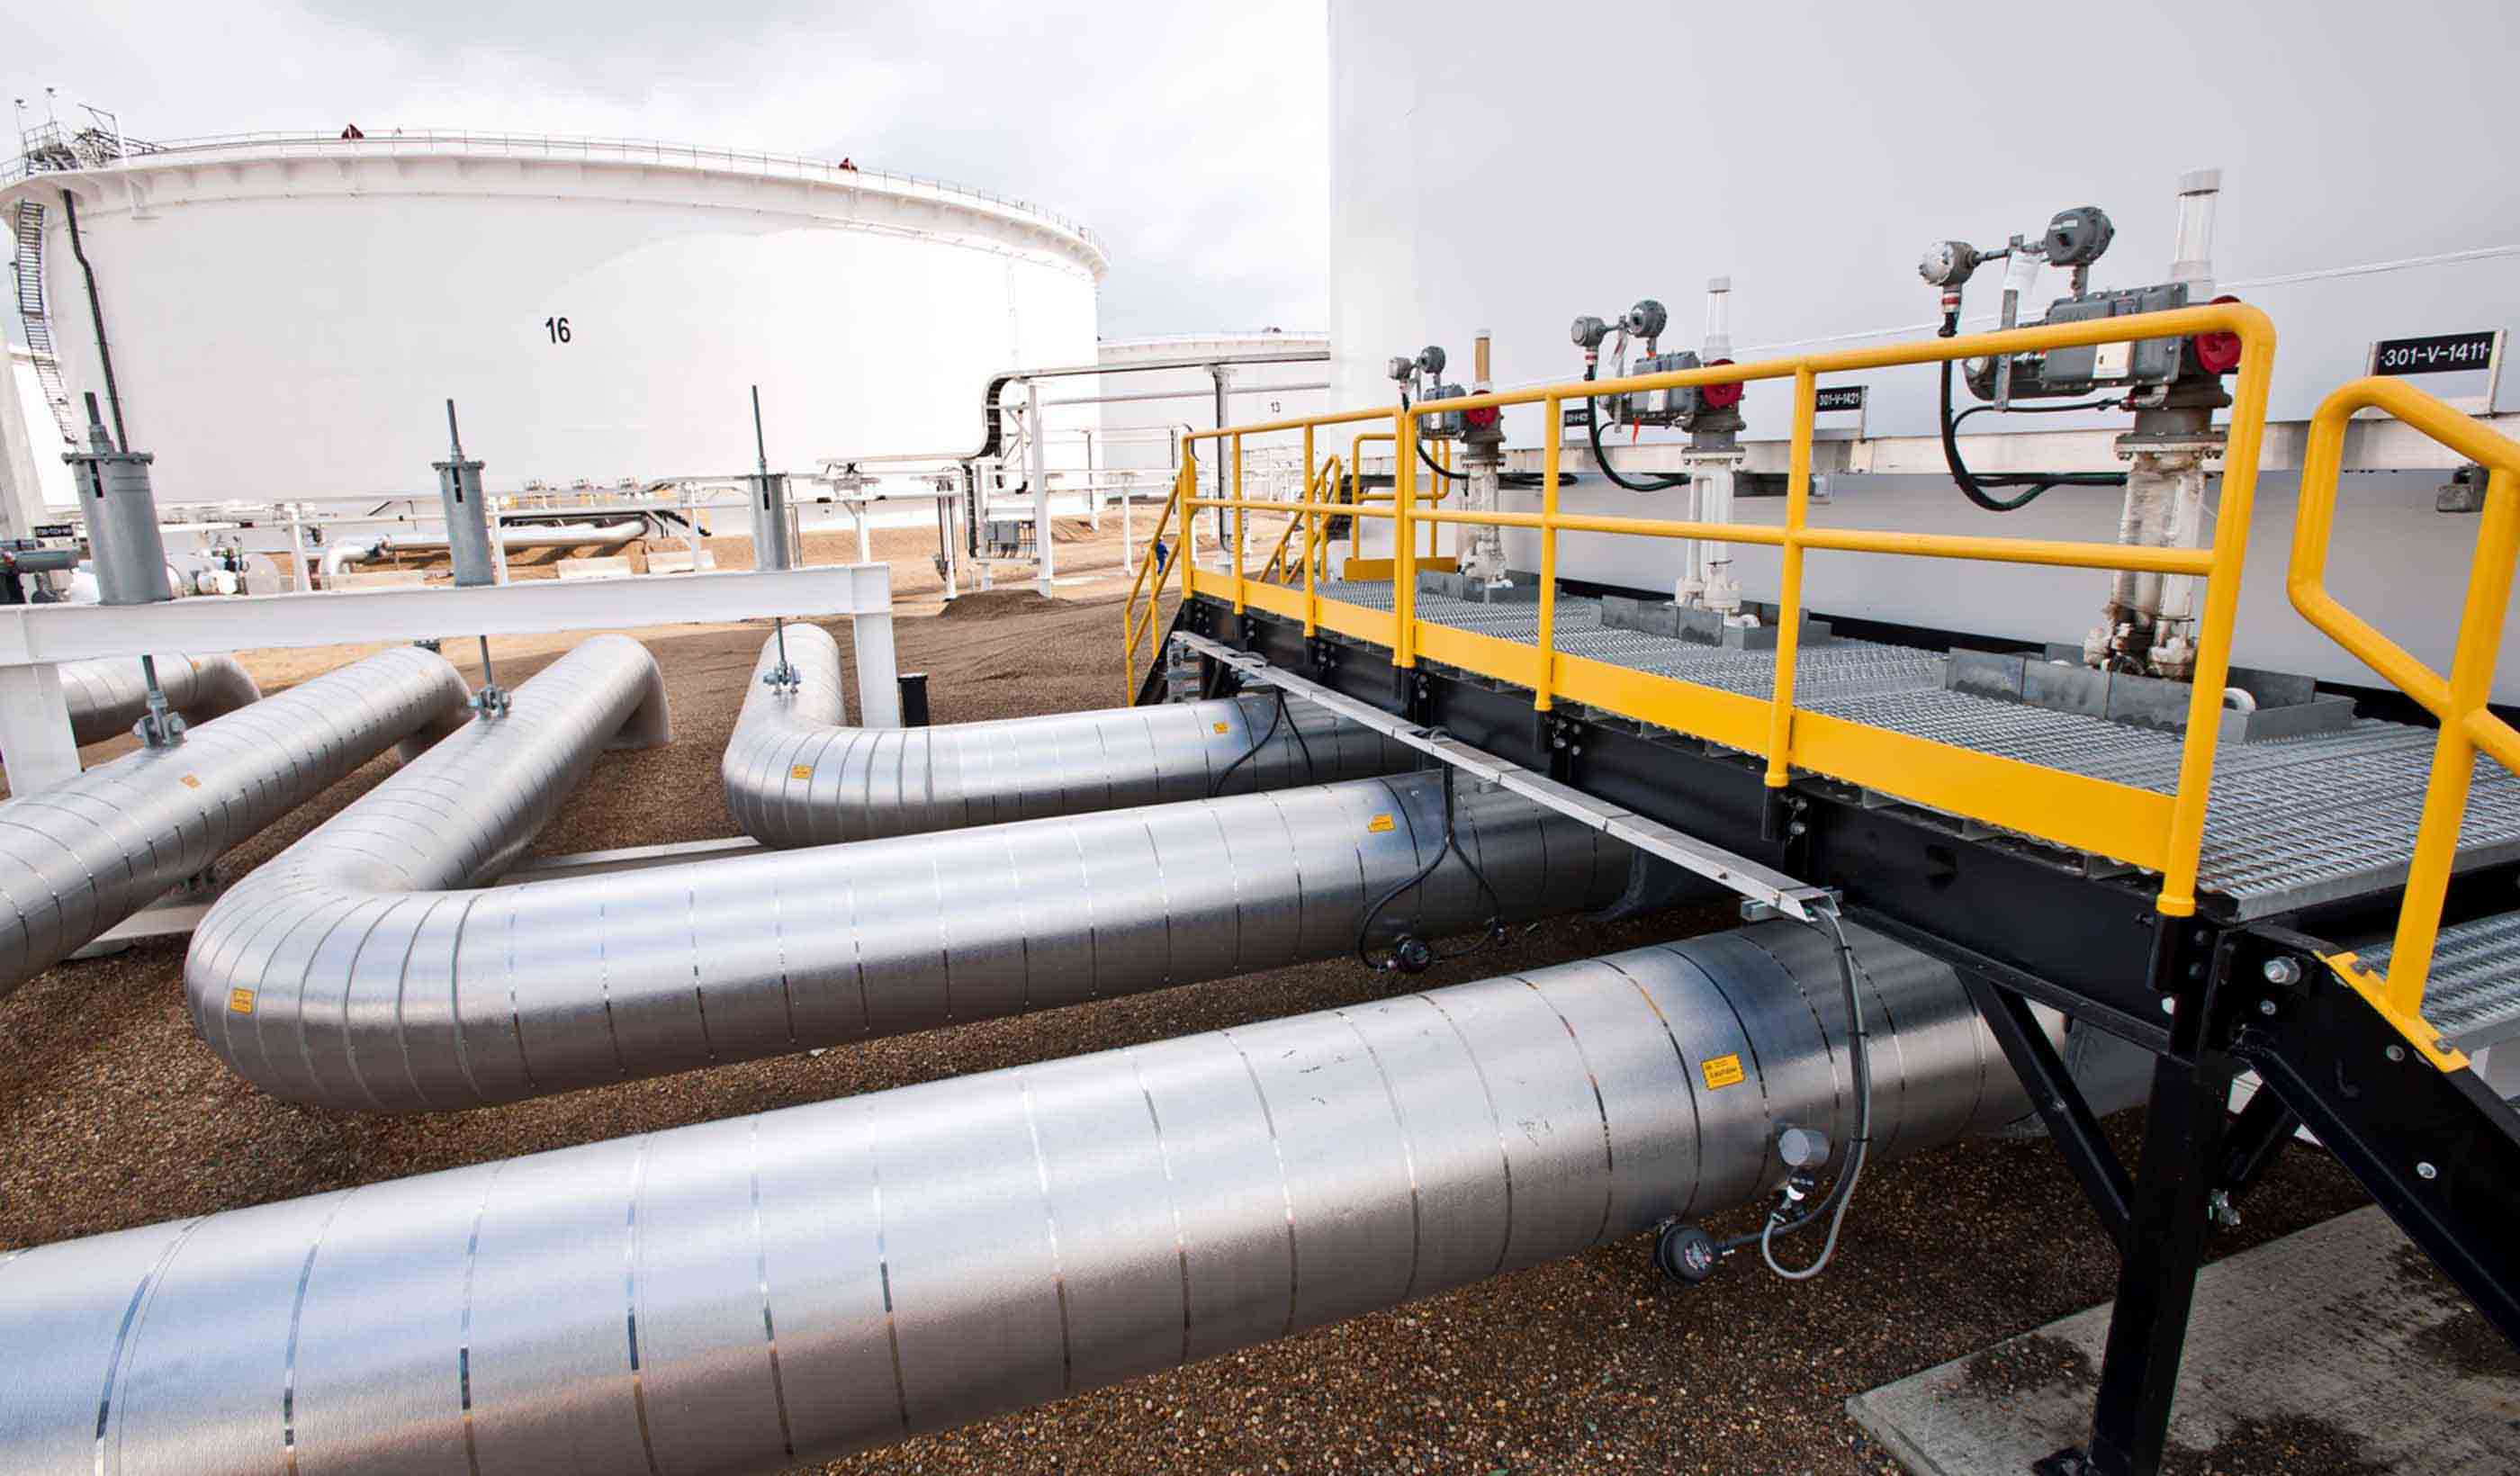 6 sustainable solutions for reducing GHG emissions at pipeline facilities